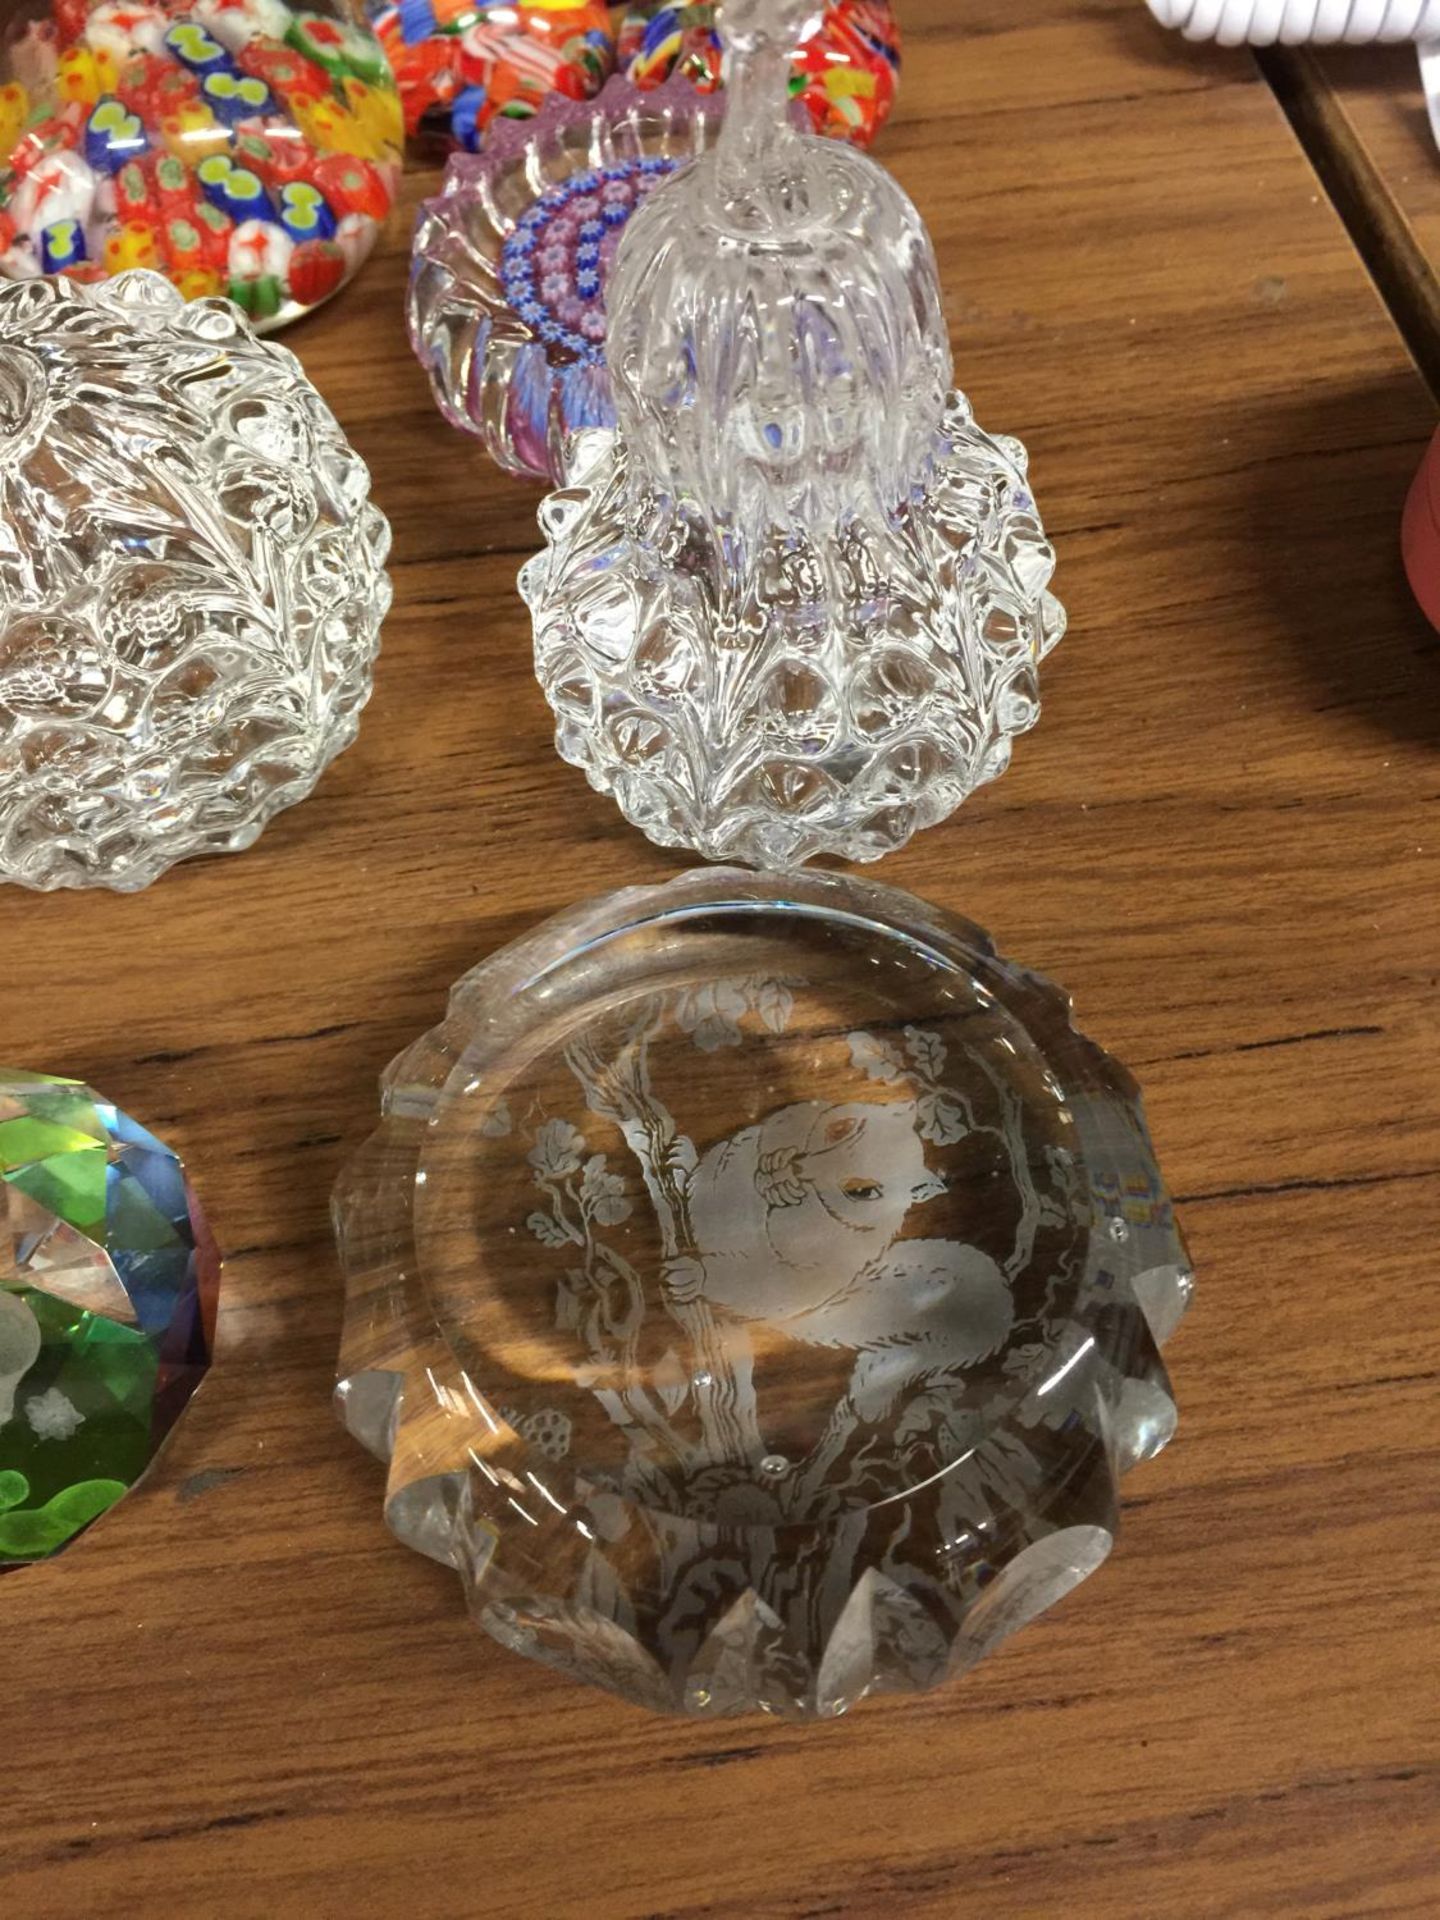 A QUANTITY OF GLASS PAPERWEIGHTS INCLUDING MILLEFIORI STYLE, FRUIT SHAPES, ETC - Image 3 of 3